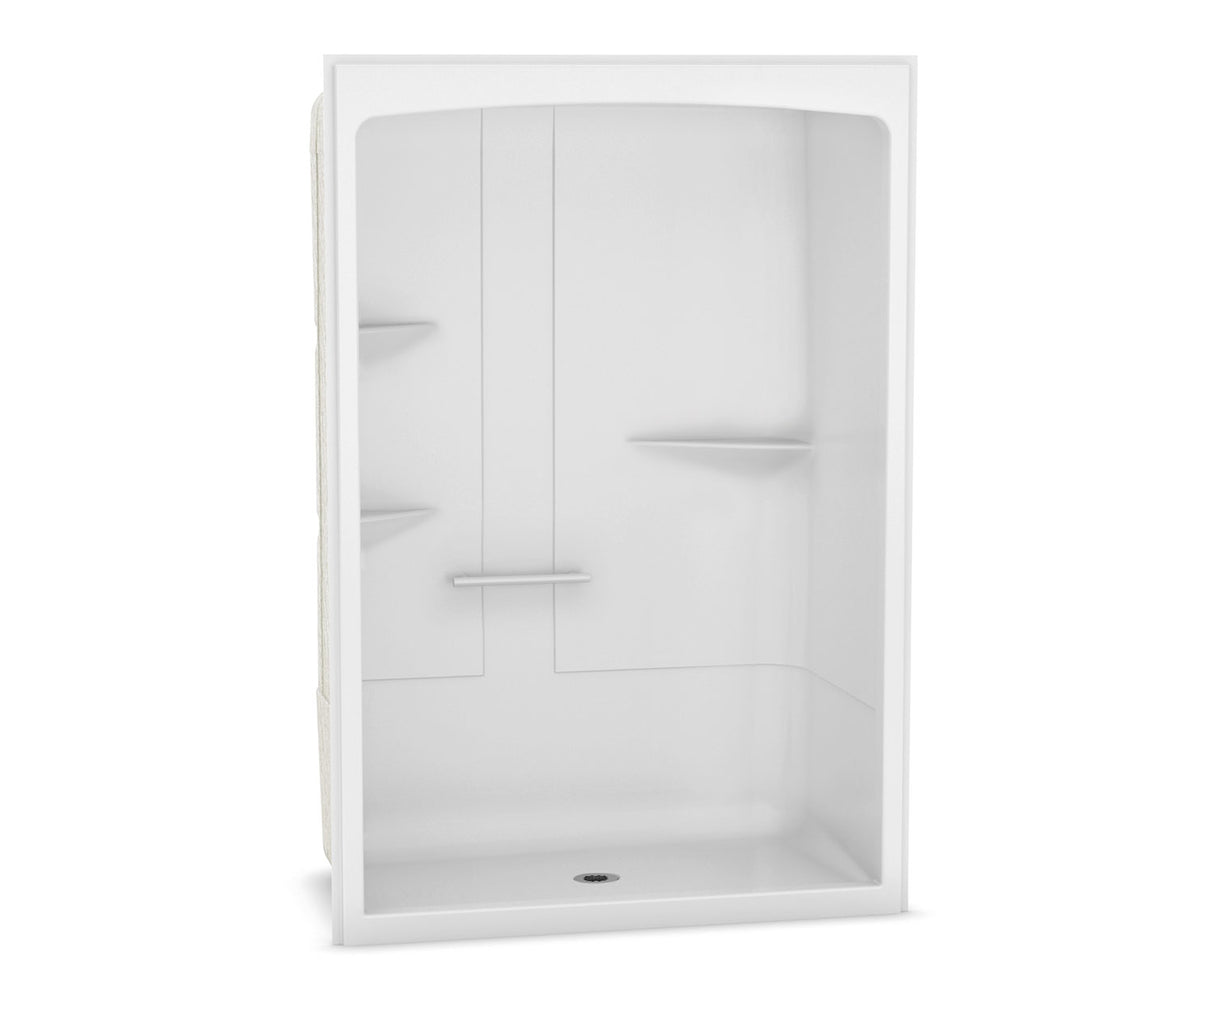 MAAX 105922-RC-000-001 Camelia SHR-6034 Acrylic Alcove Center Drain One-Piece Shower in White